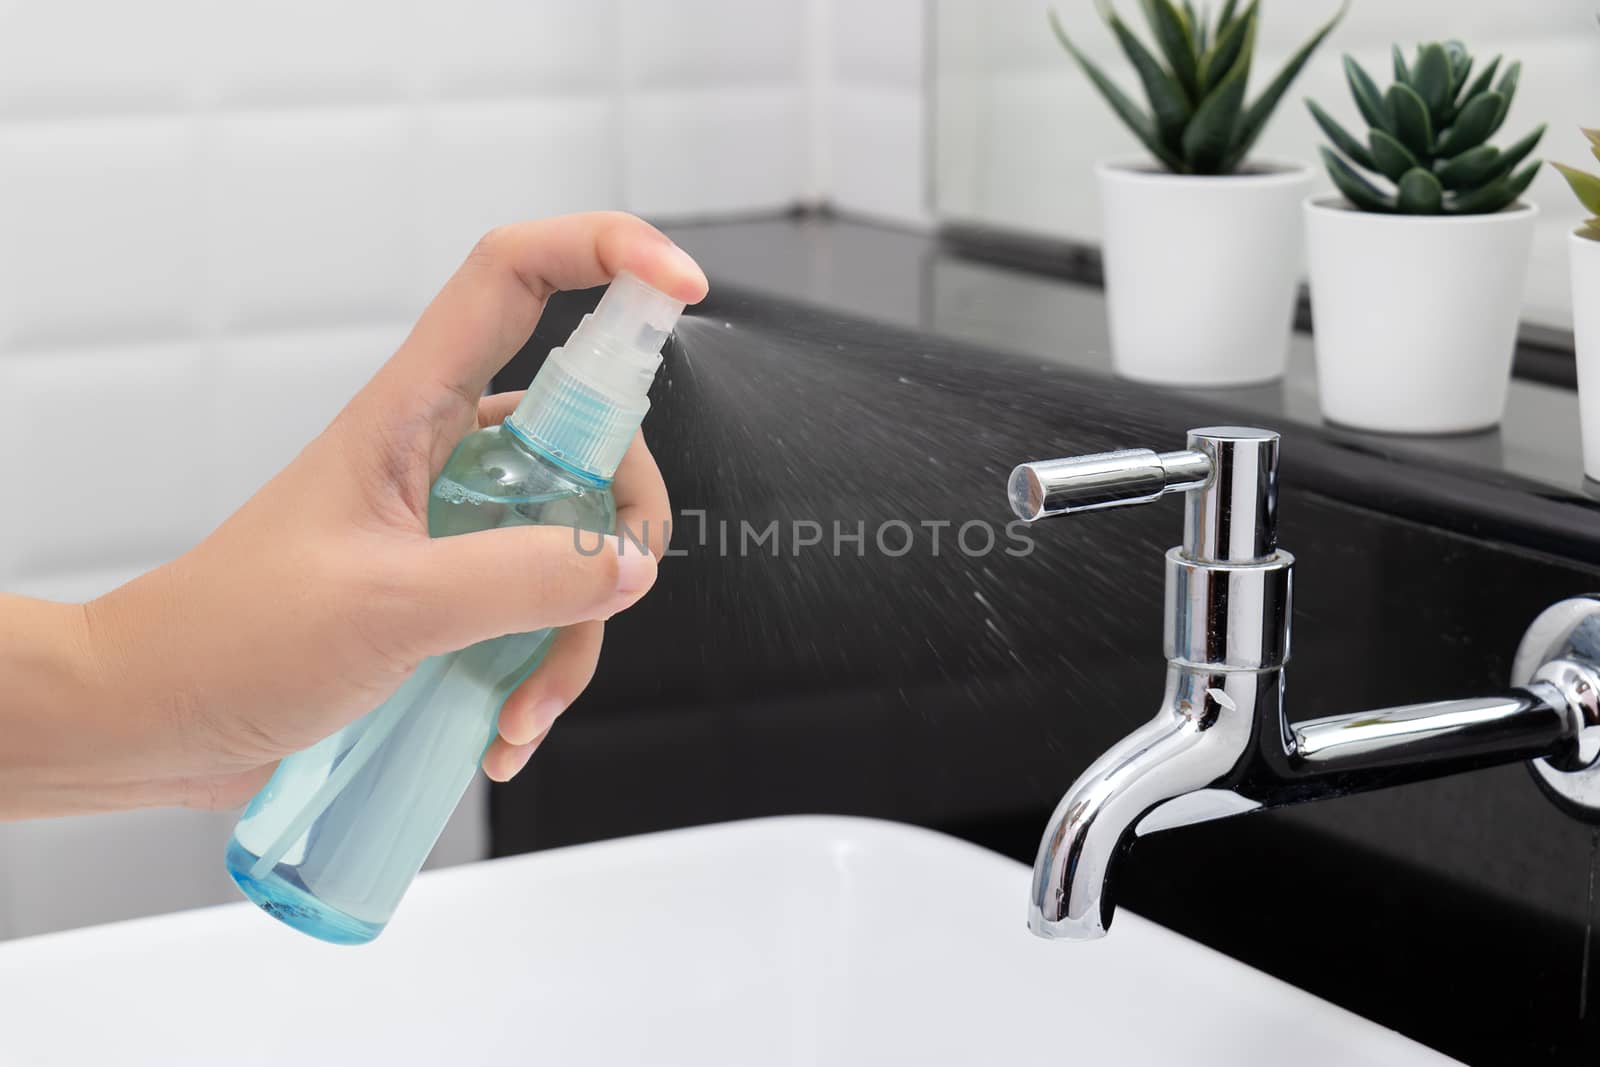 disinfect, sanitize, hygiene care. people using alcohol spray on faucet , hydrant and frequently touched area for cleaning and prevention of germs spreading during infections of COVID-19